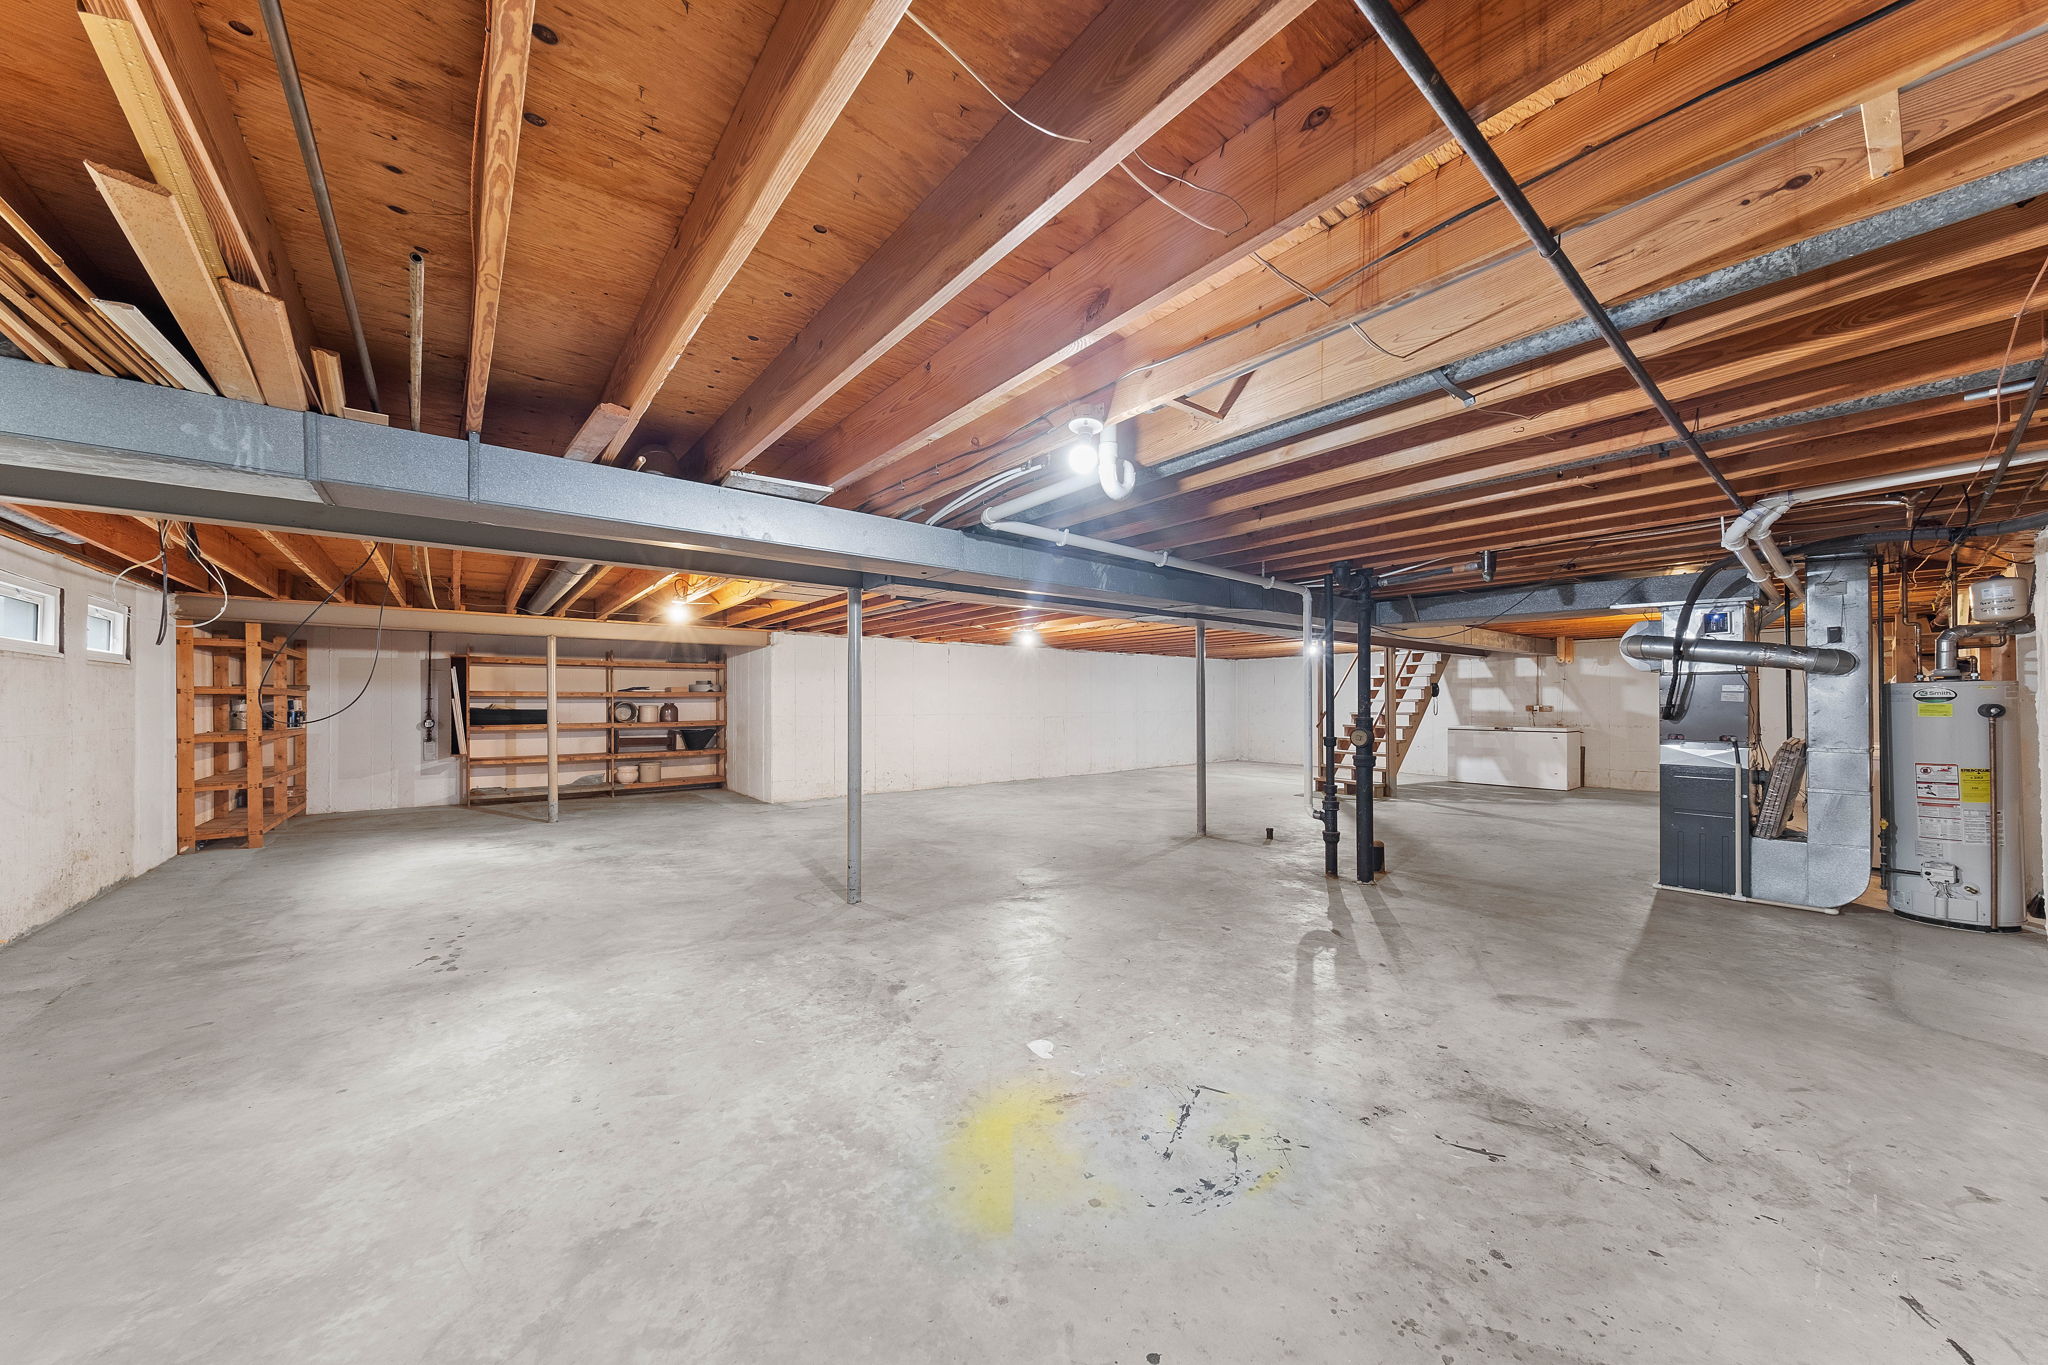 Theater, playroom, game room, home office, yoga studio, bar? Room to do anything and everything.  Double your living space by renovating this incredible basement.